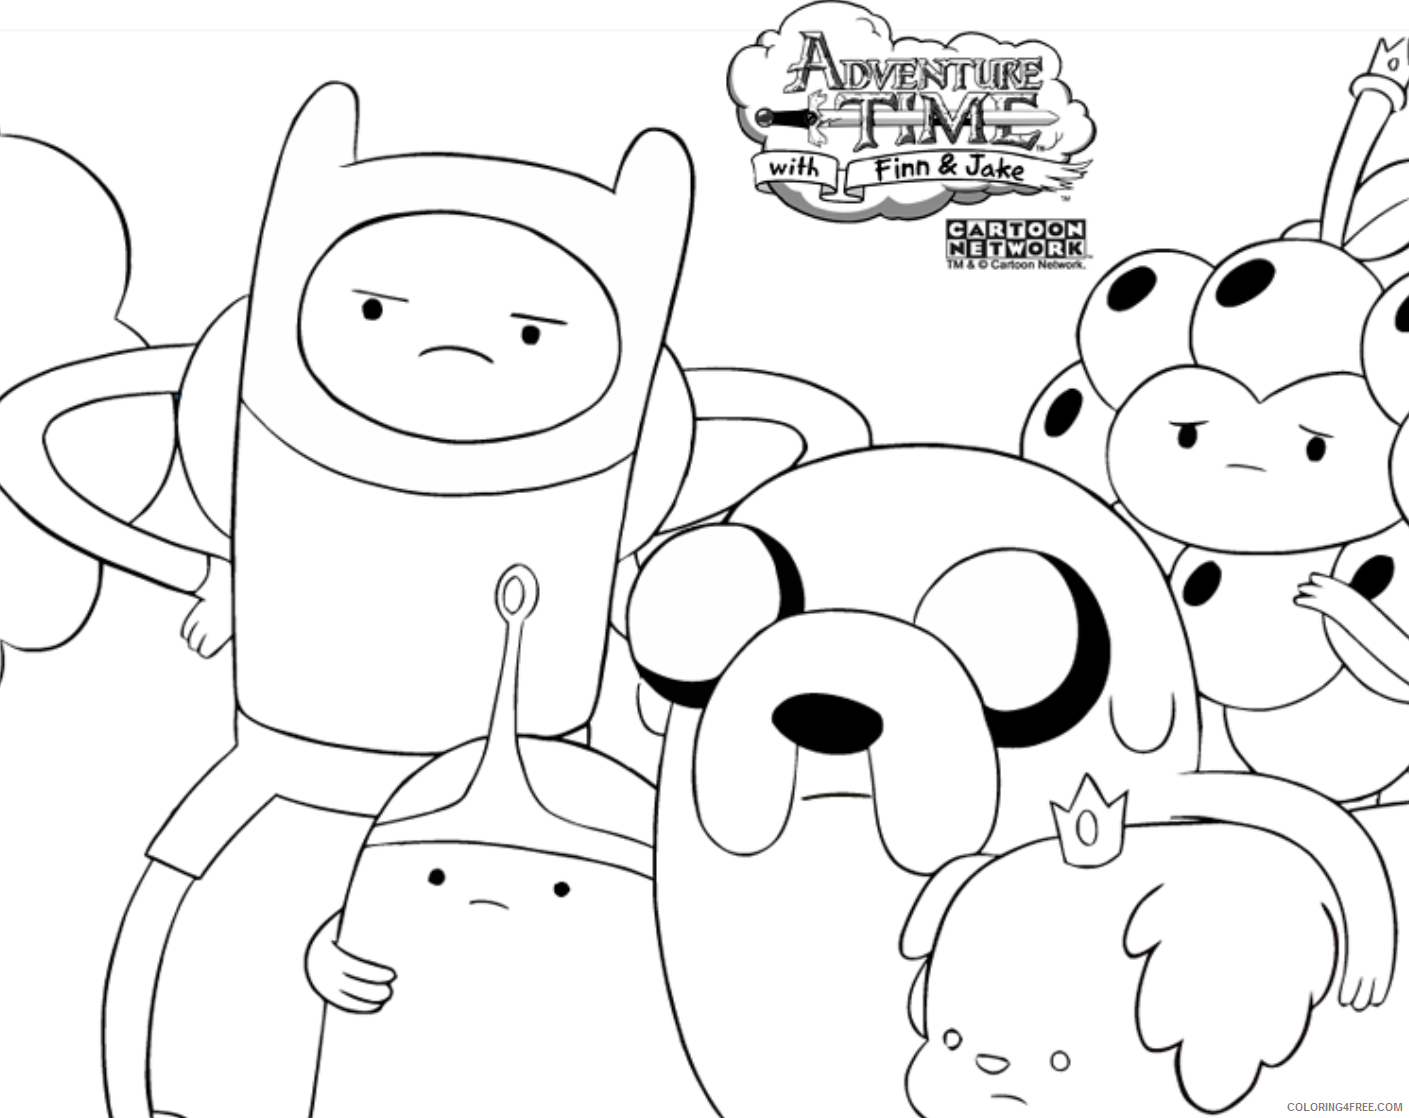 Adventure Time Coloring Pages Online Printable Sheets Adventure Time Cartoon 2021 a 2636 Coloring4free